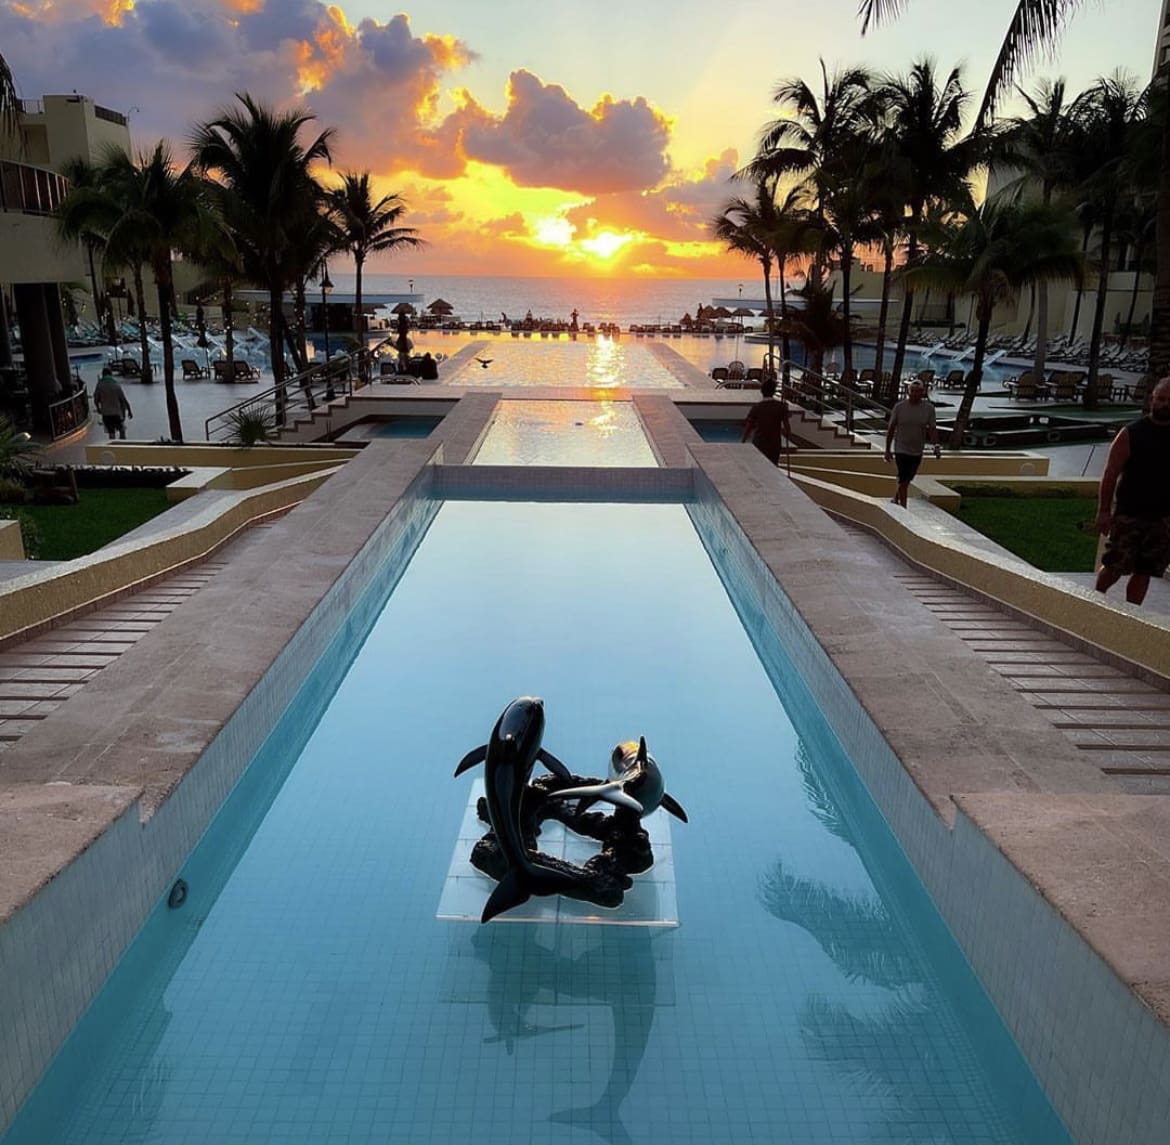 Picturesque sunset over a luxury hotel swimming pool in Cancun